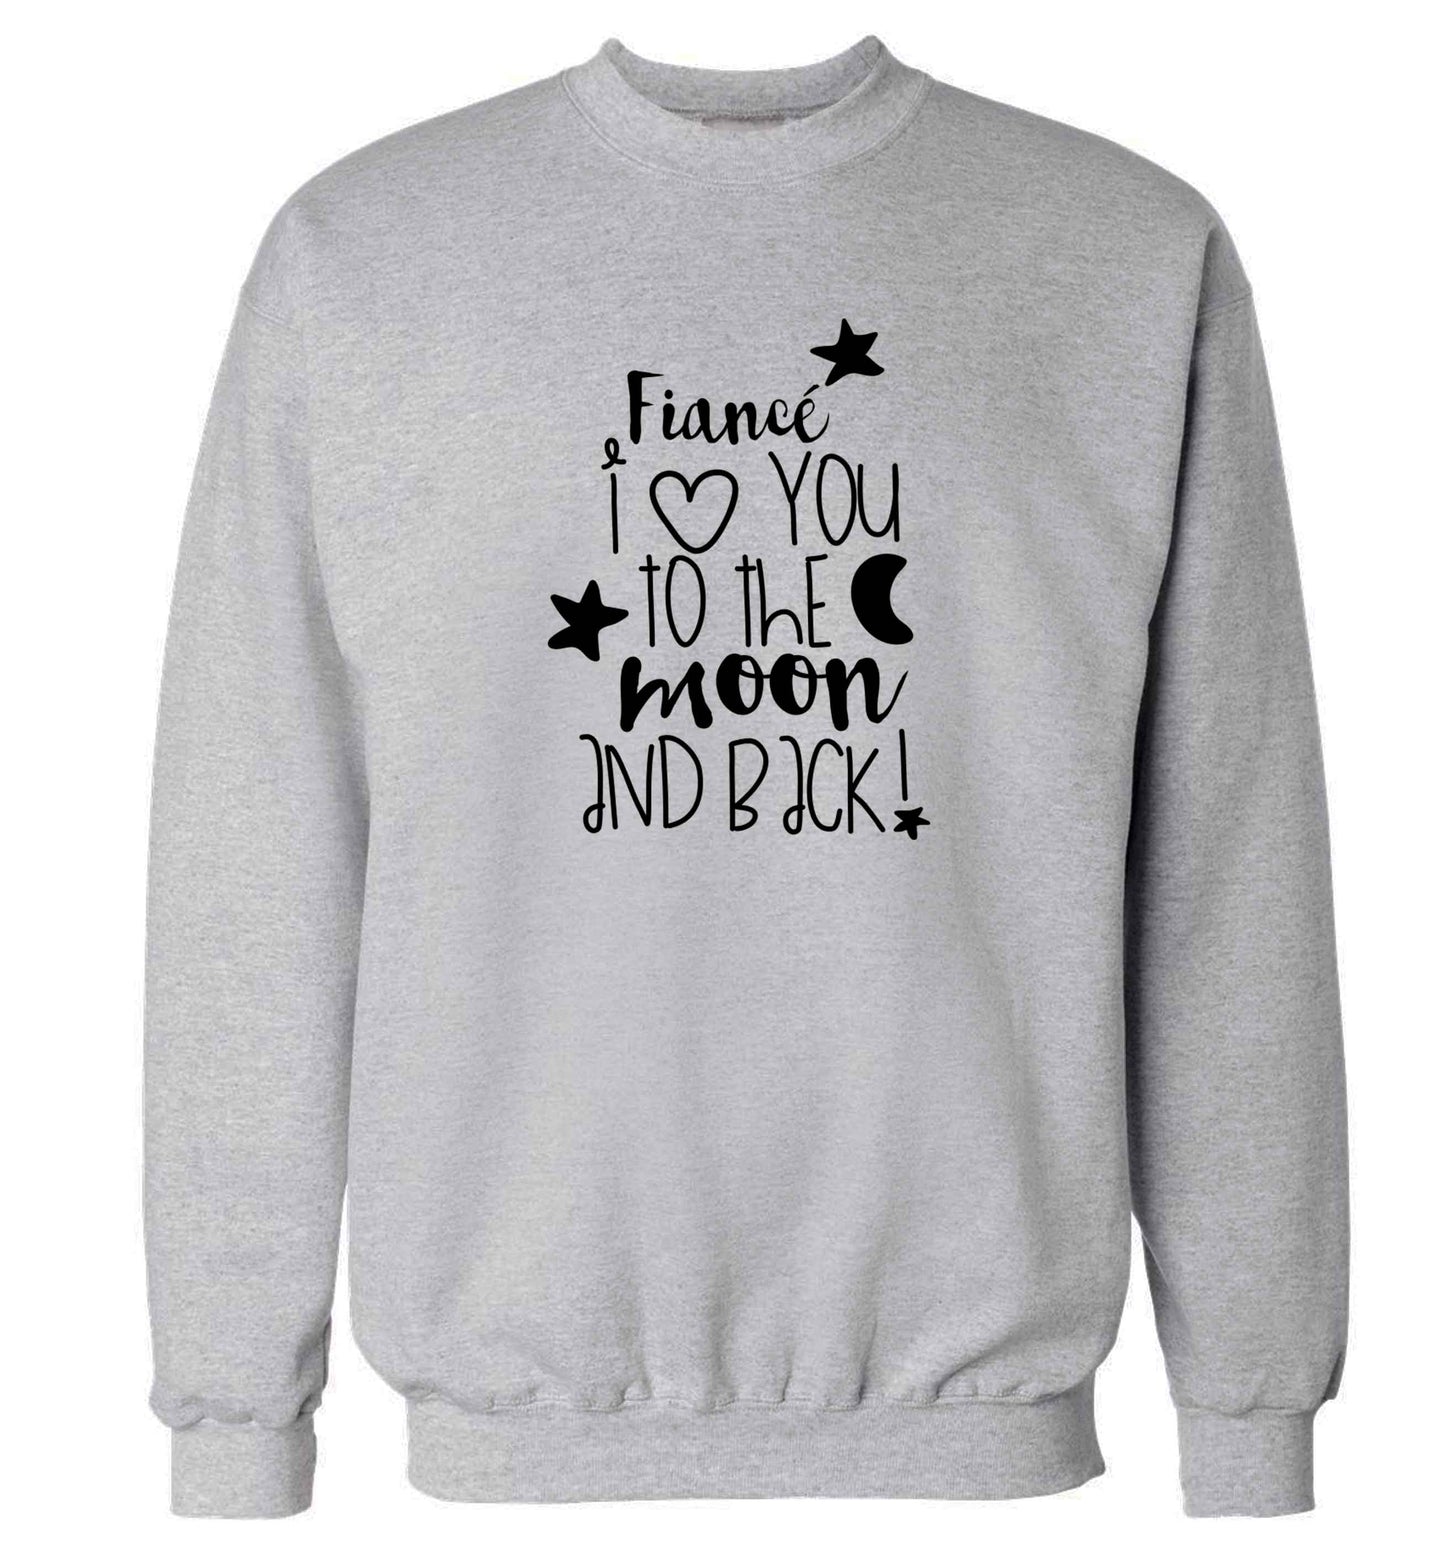 Fiancé I love you to the moon and back adult's unisex grey sweater 2XL